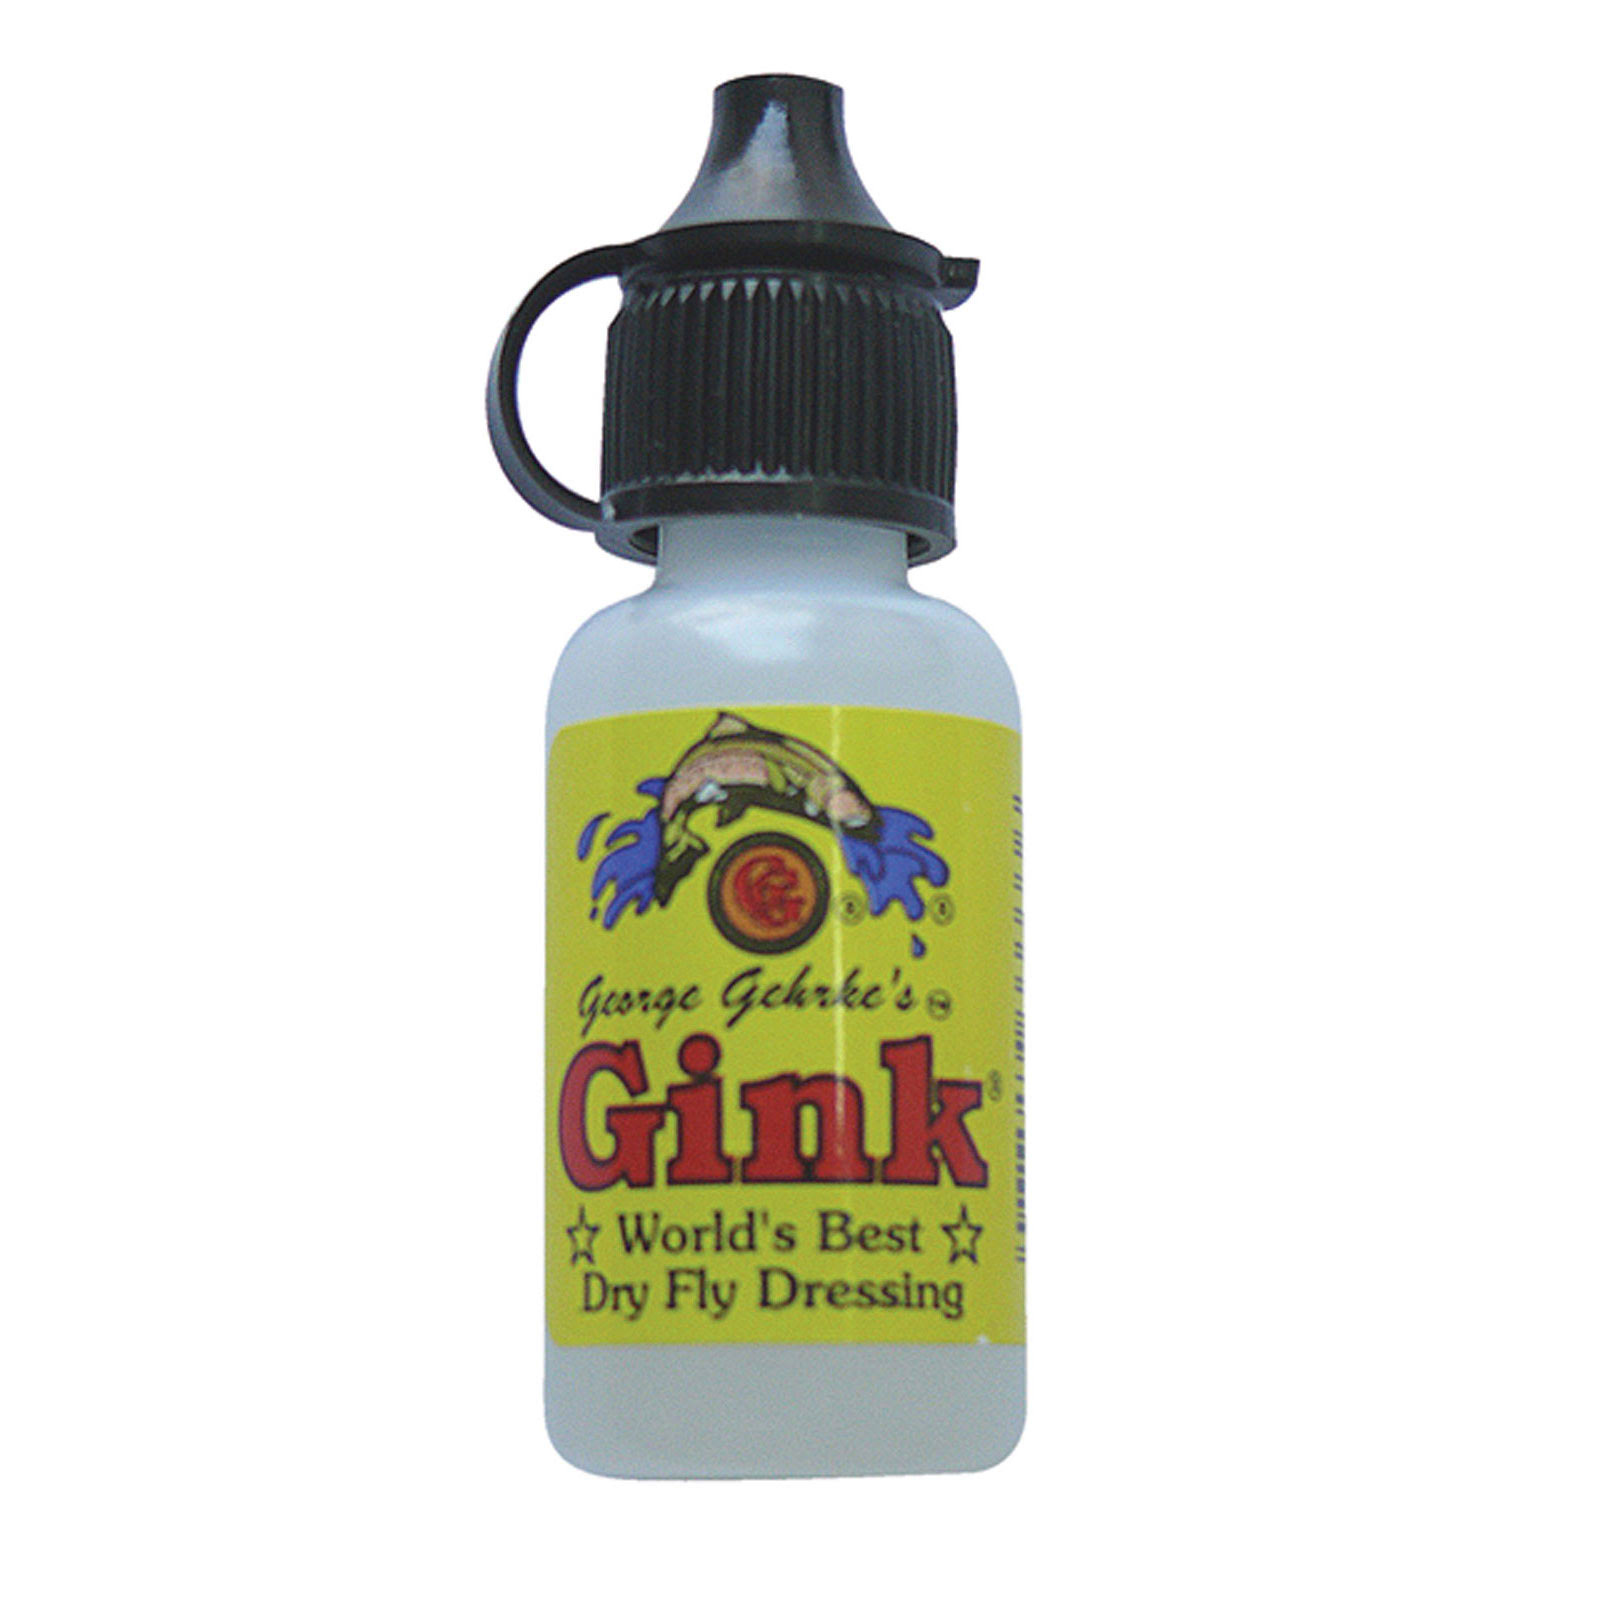 George Gehrke's Gink Dry Fly Dressing